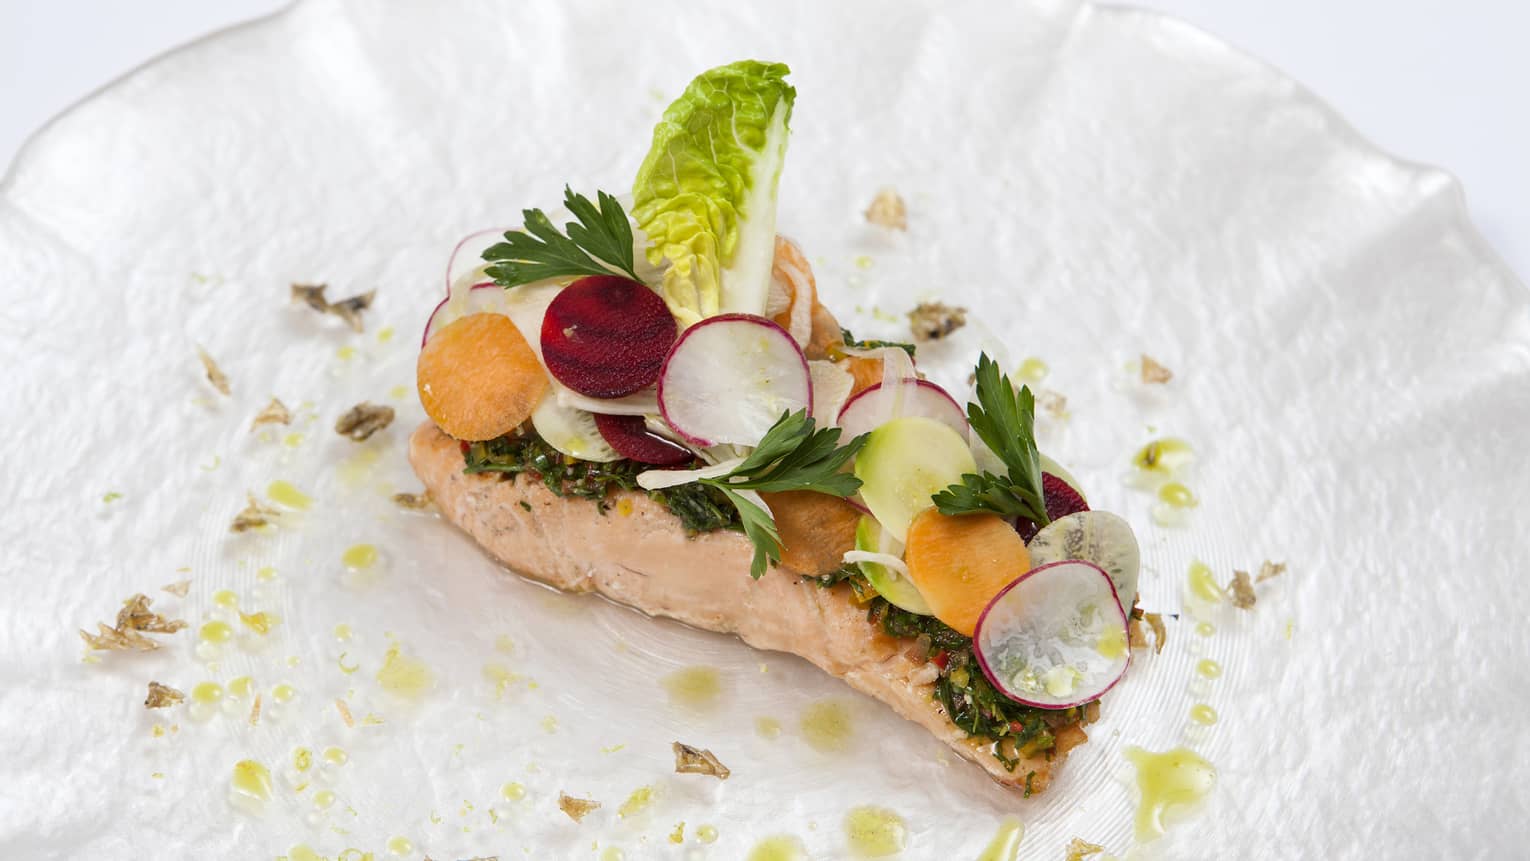 Seared salmon fillet topped with radish and lettuce garnish